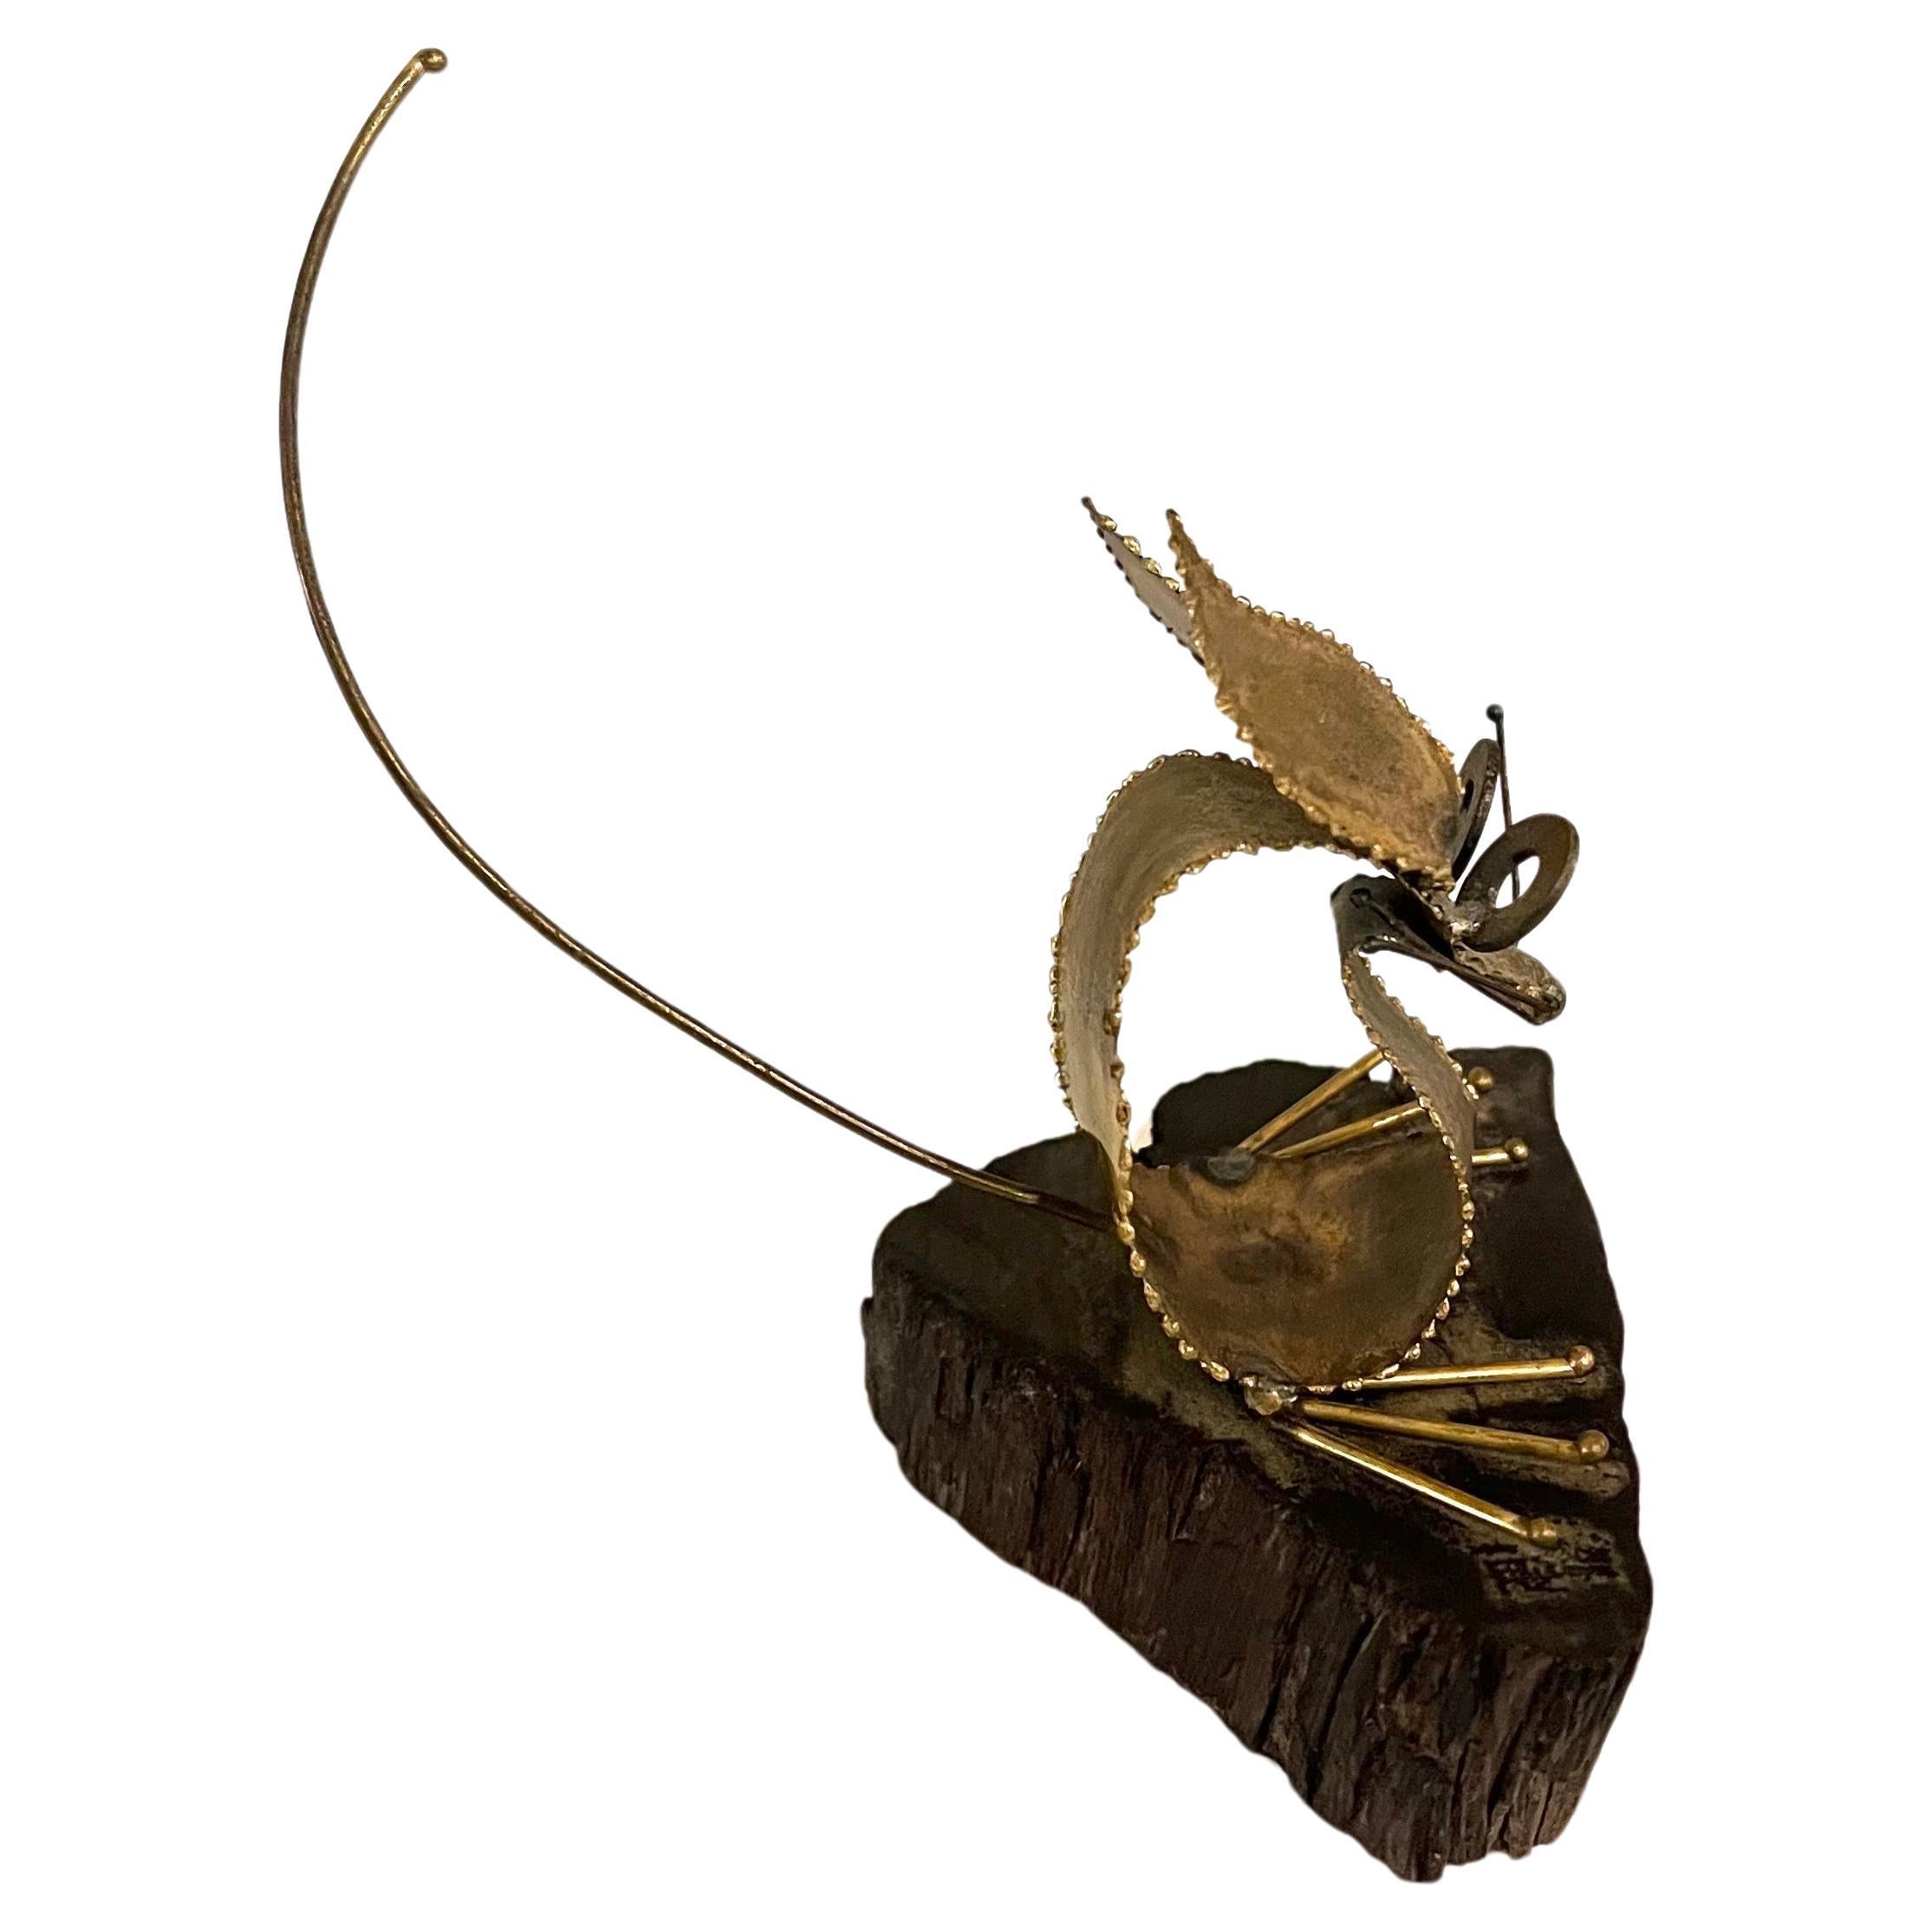 Whimsical petite welded brass sculpture in the style of Curtis Jere circa 1970's.